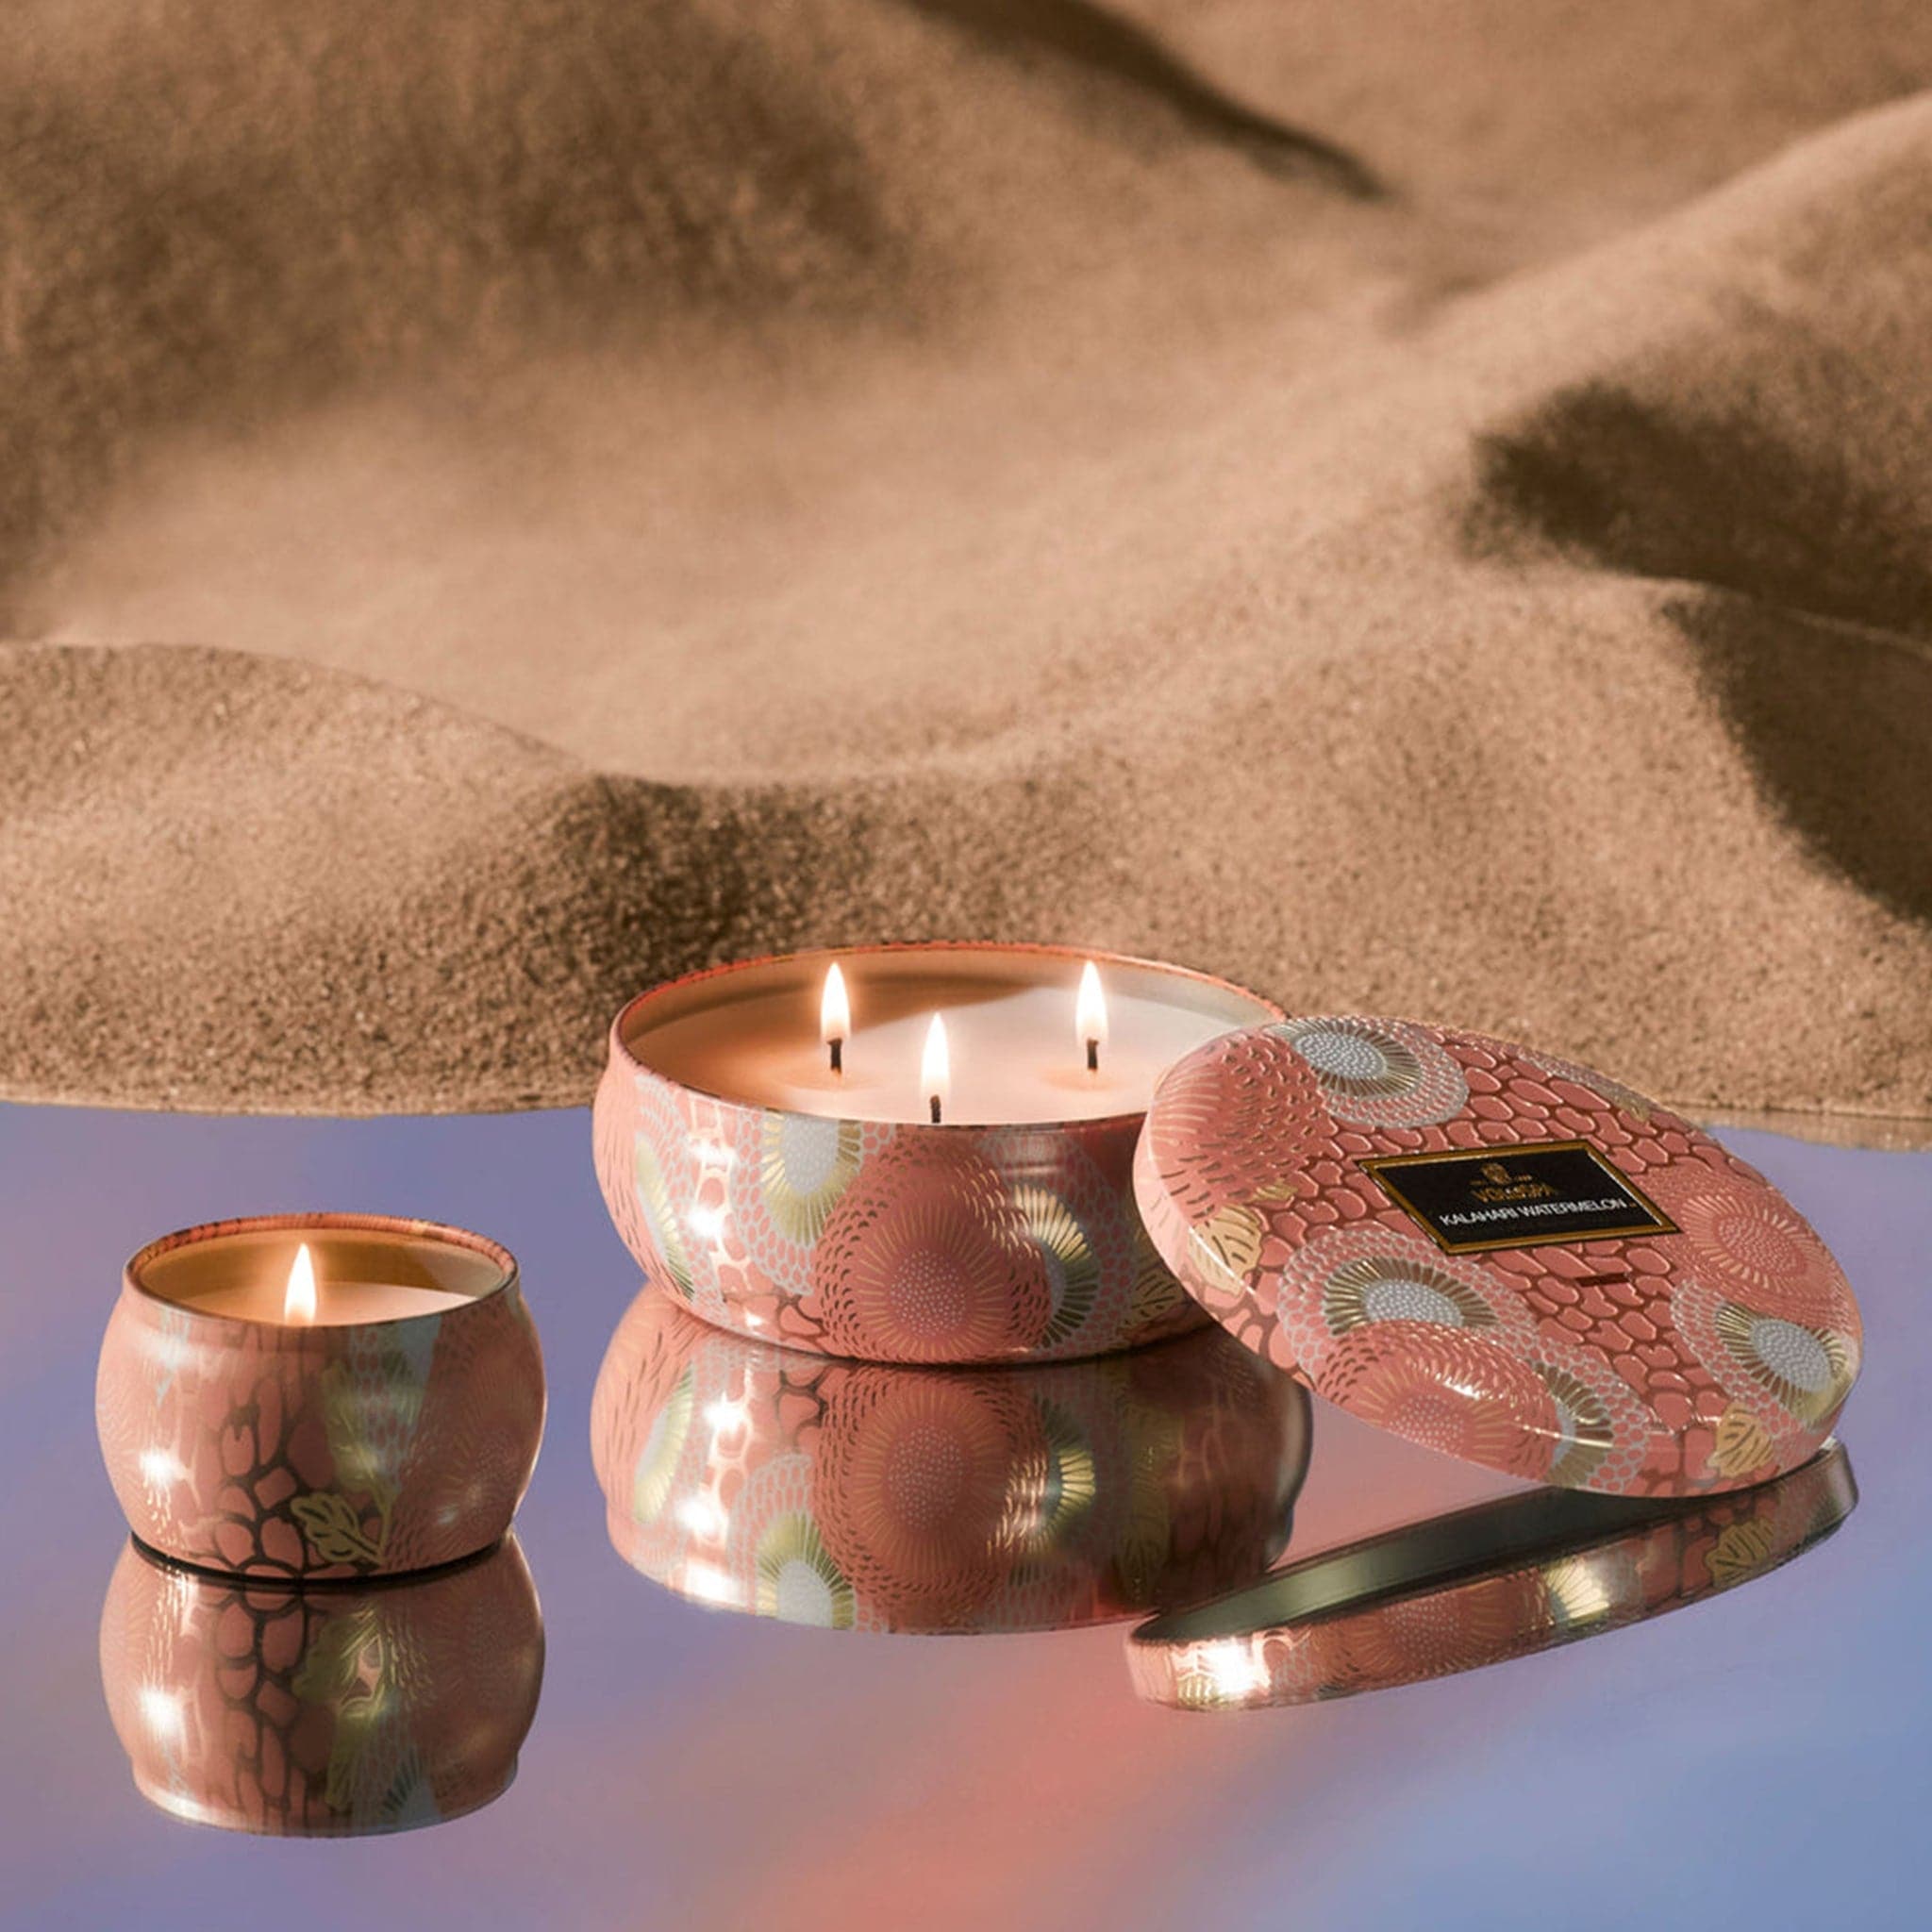 The Kalahari collection shown together with the mini tin and 3-wick tin. Its colors are beautiful and the jar's tin distributes light in a romantic way. Edit alt text